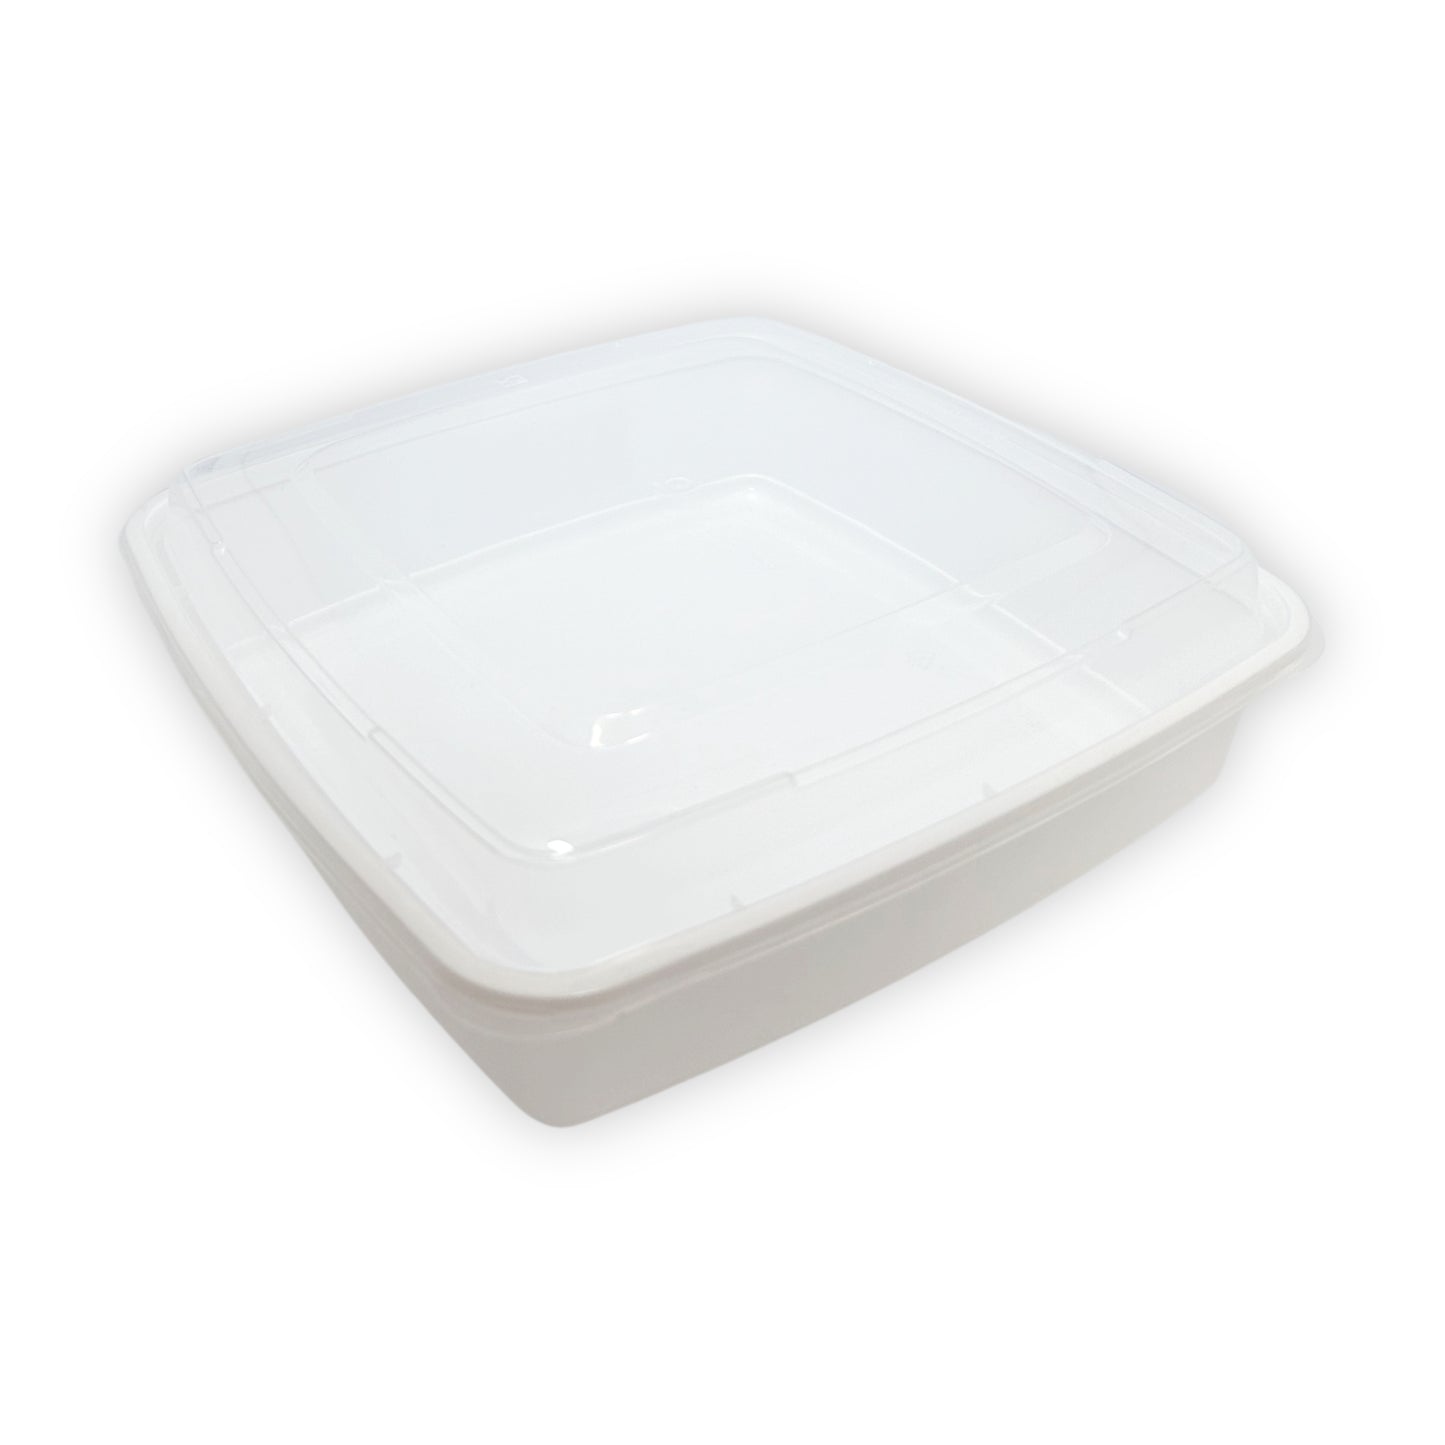 KIS-KY48G | 100sets 48oz, 1420ml White PP Square Container with Clear Lids Combo; $0.450/set